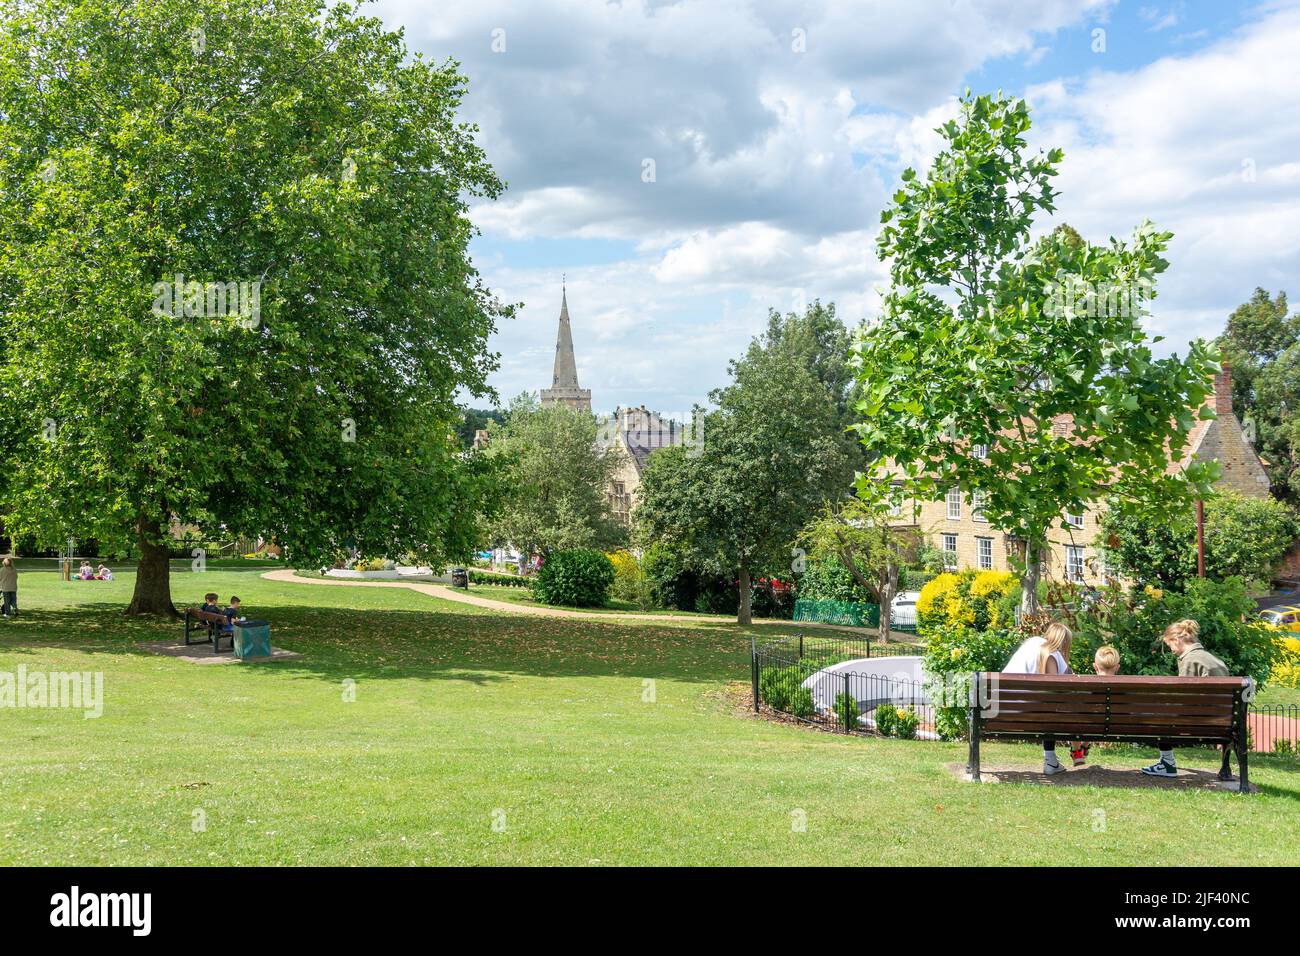 View of town from Peace Memorial Park, Thrapston, Northamptonshire, England, United Kingdom Stock Photo